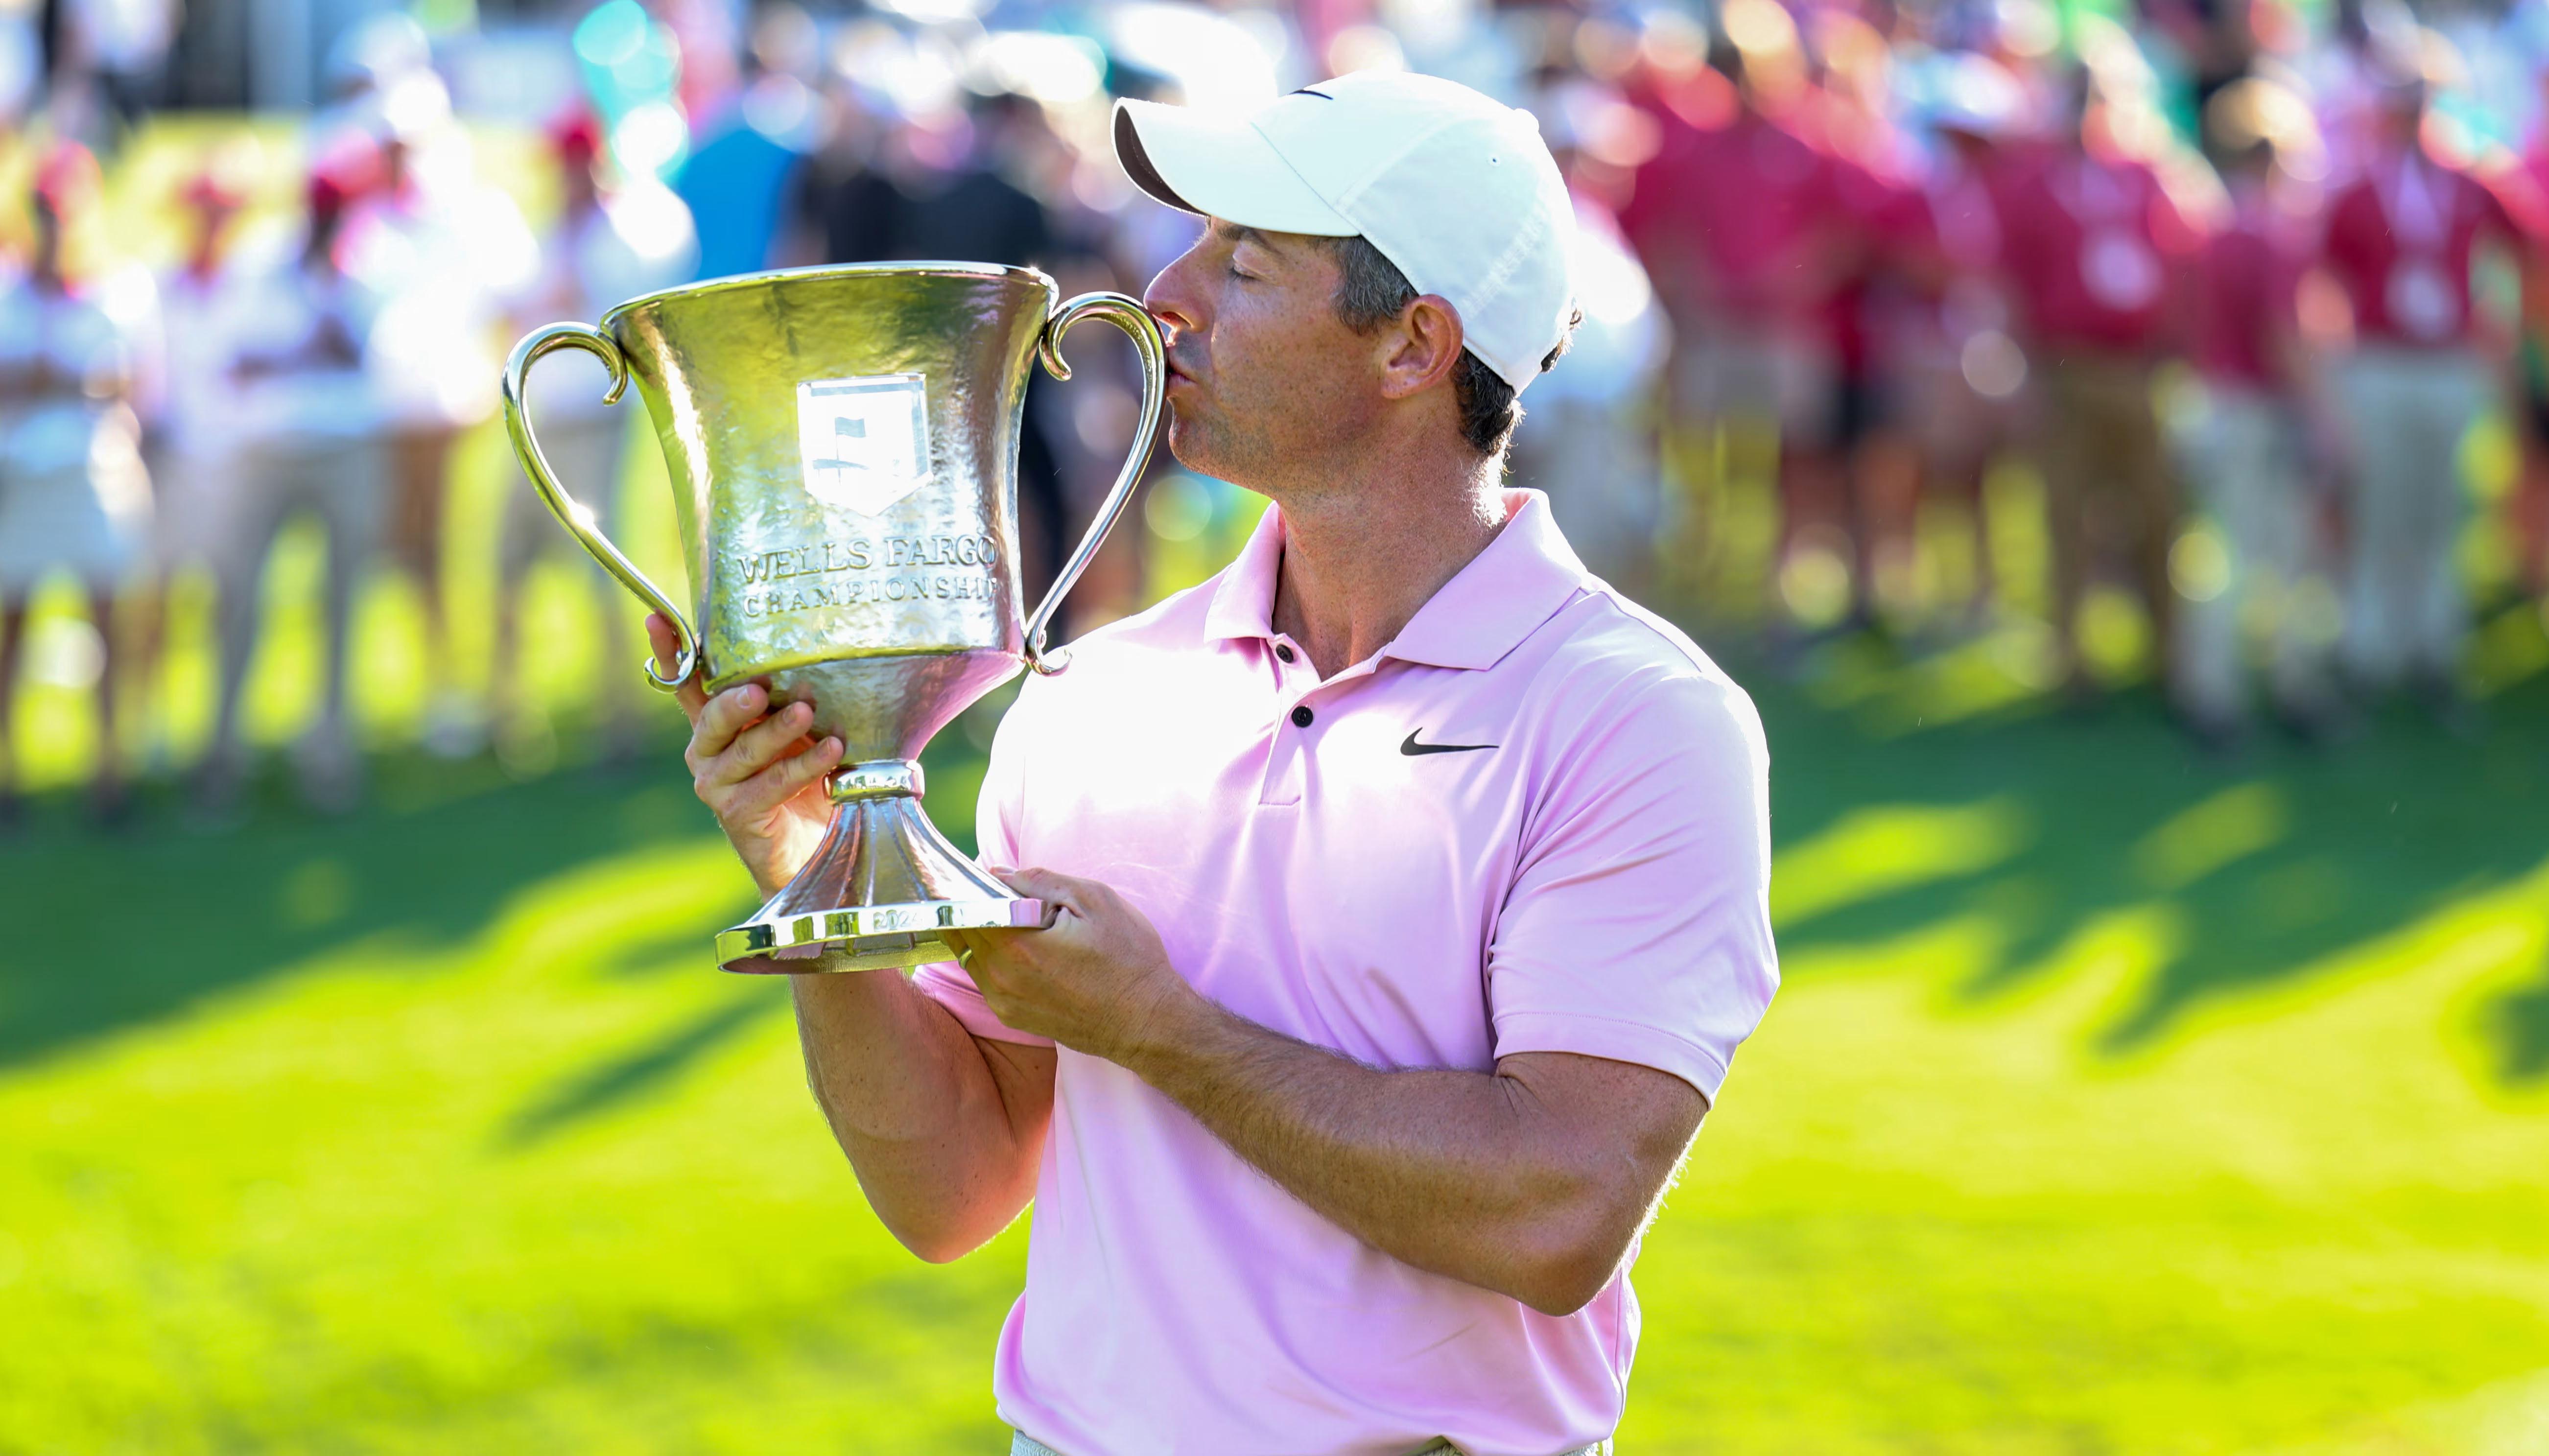 Rory McIlroy is ‘back’ after dominant Wells Fargo performance